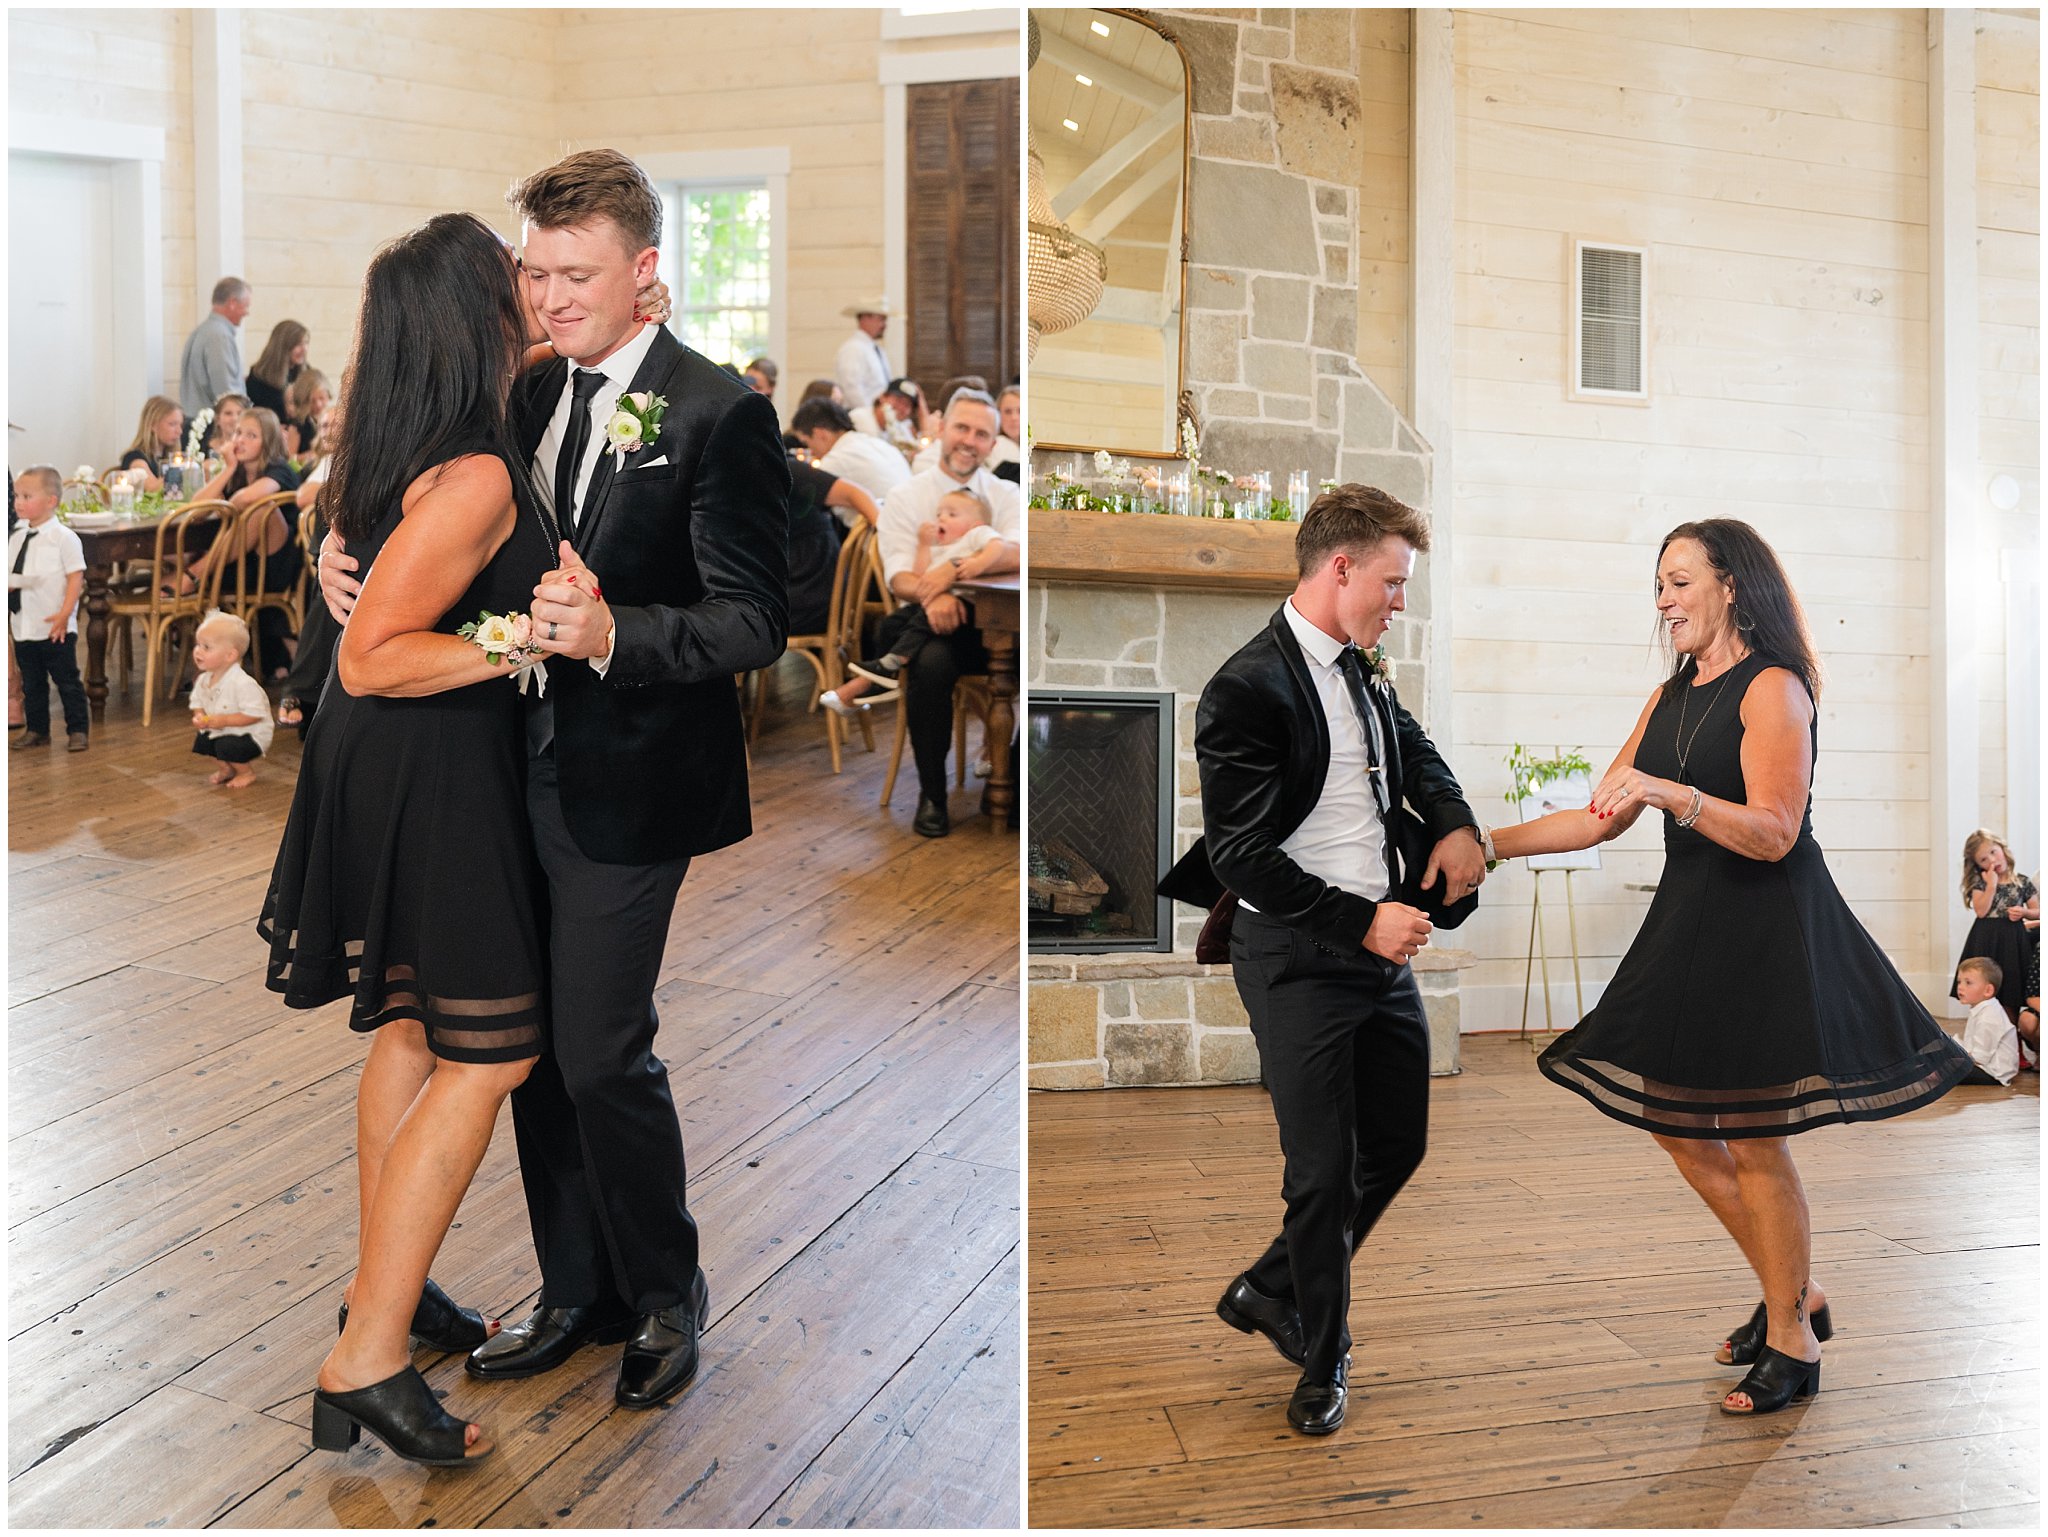 Wedding reception and dancing inside the barn at Walker Farms